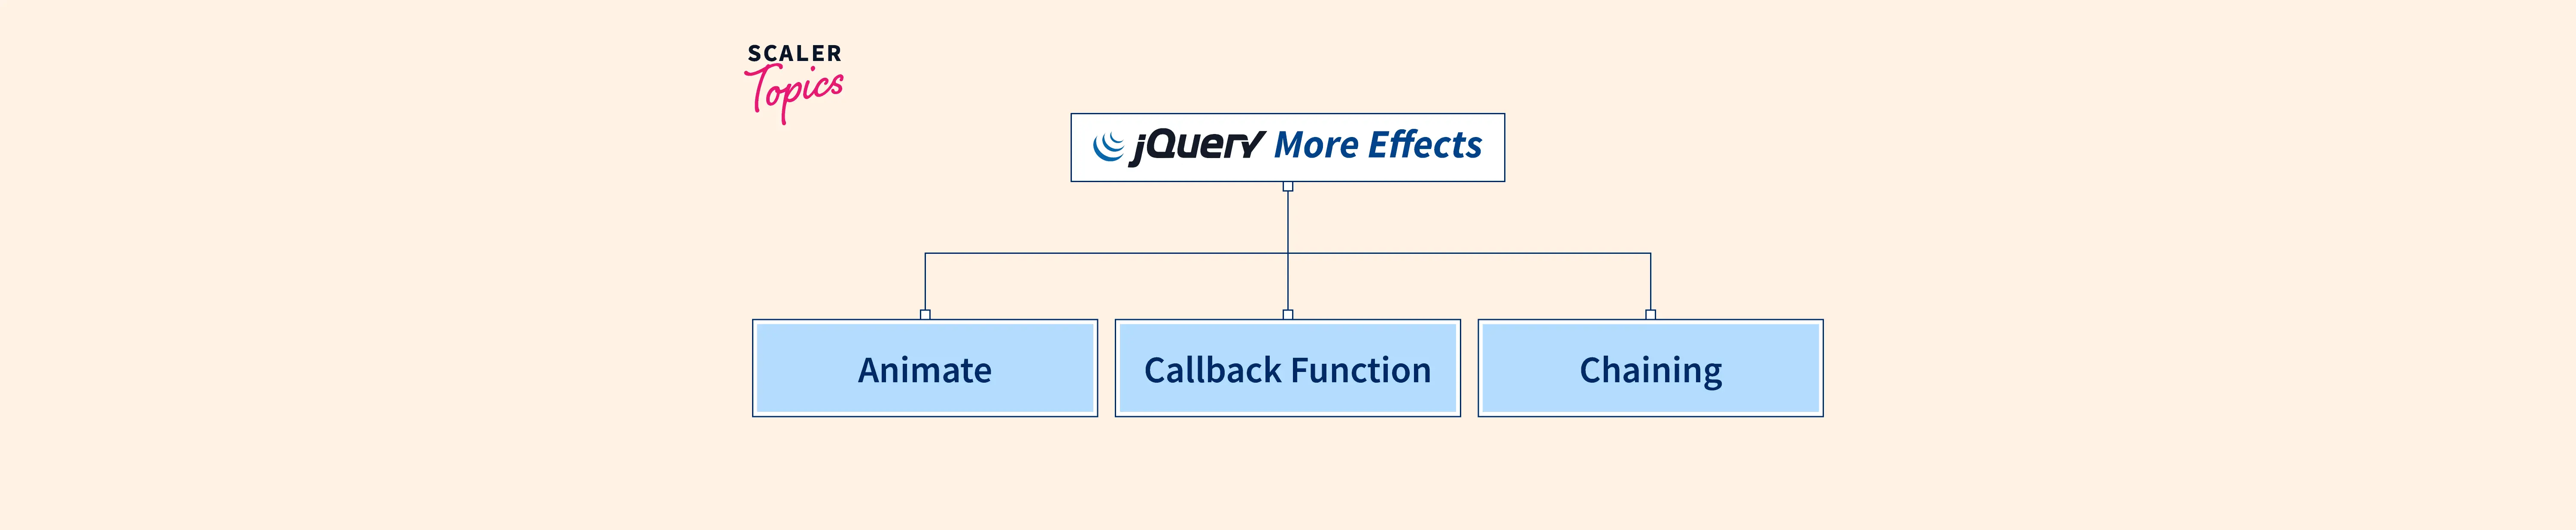 jQuery Effects - Scaler Topics